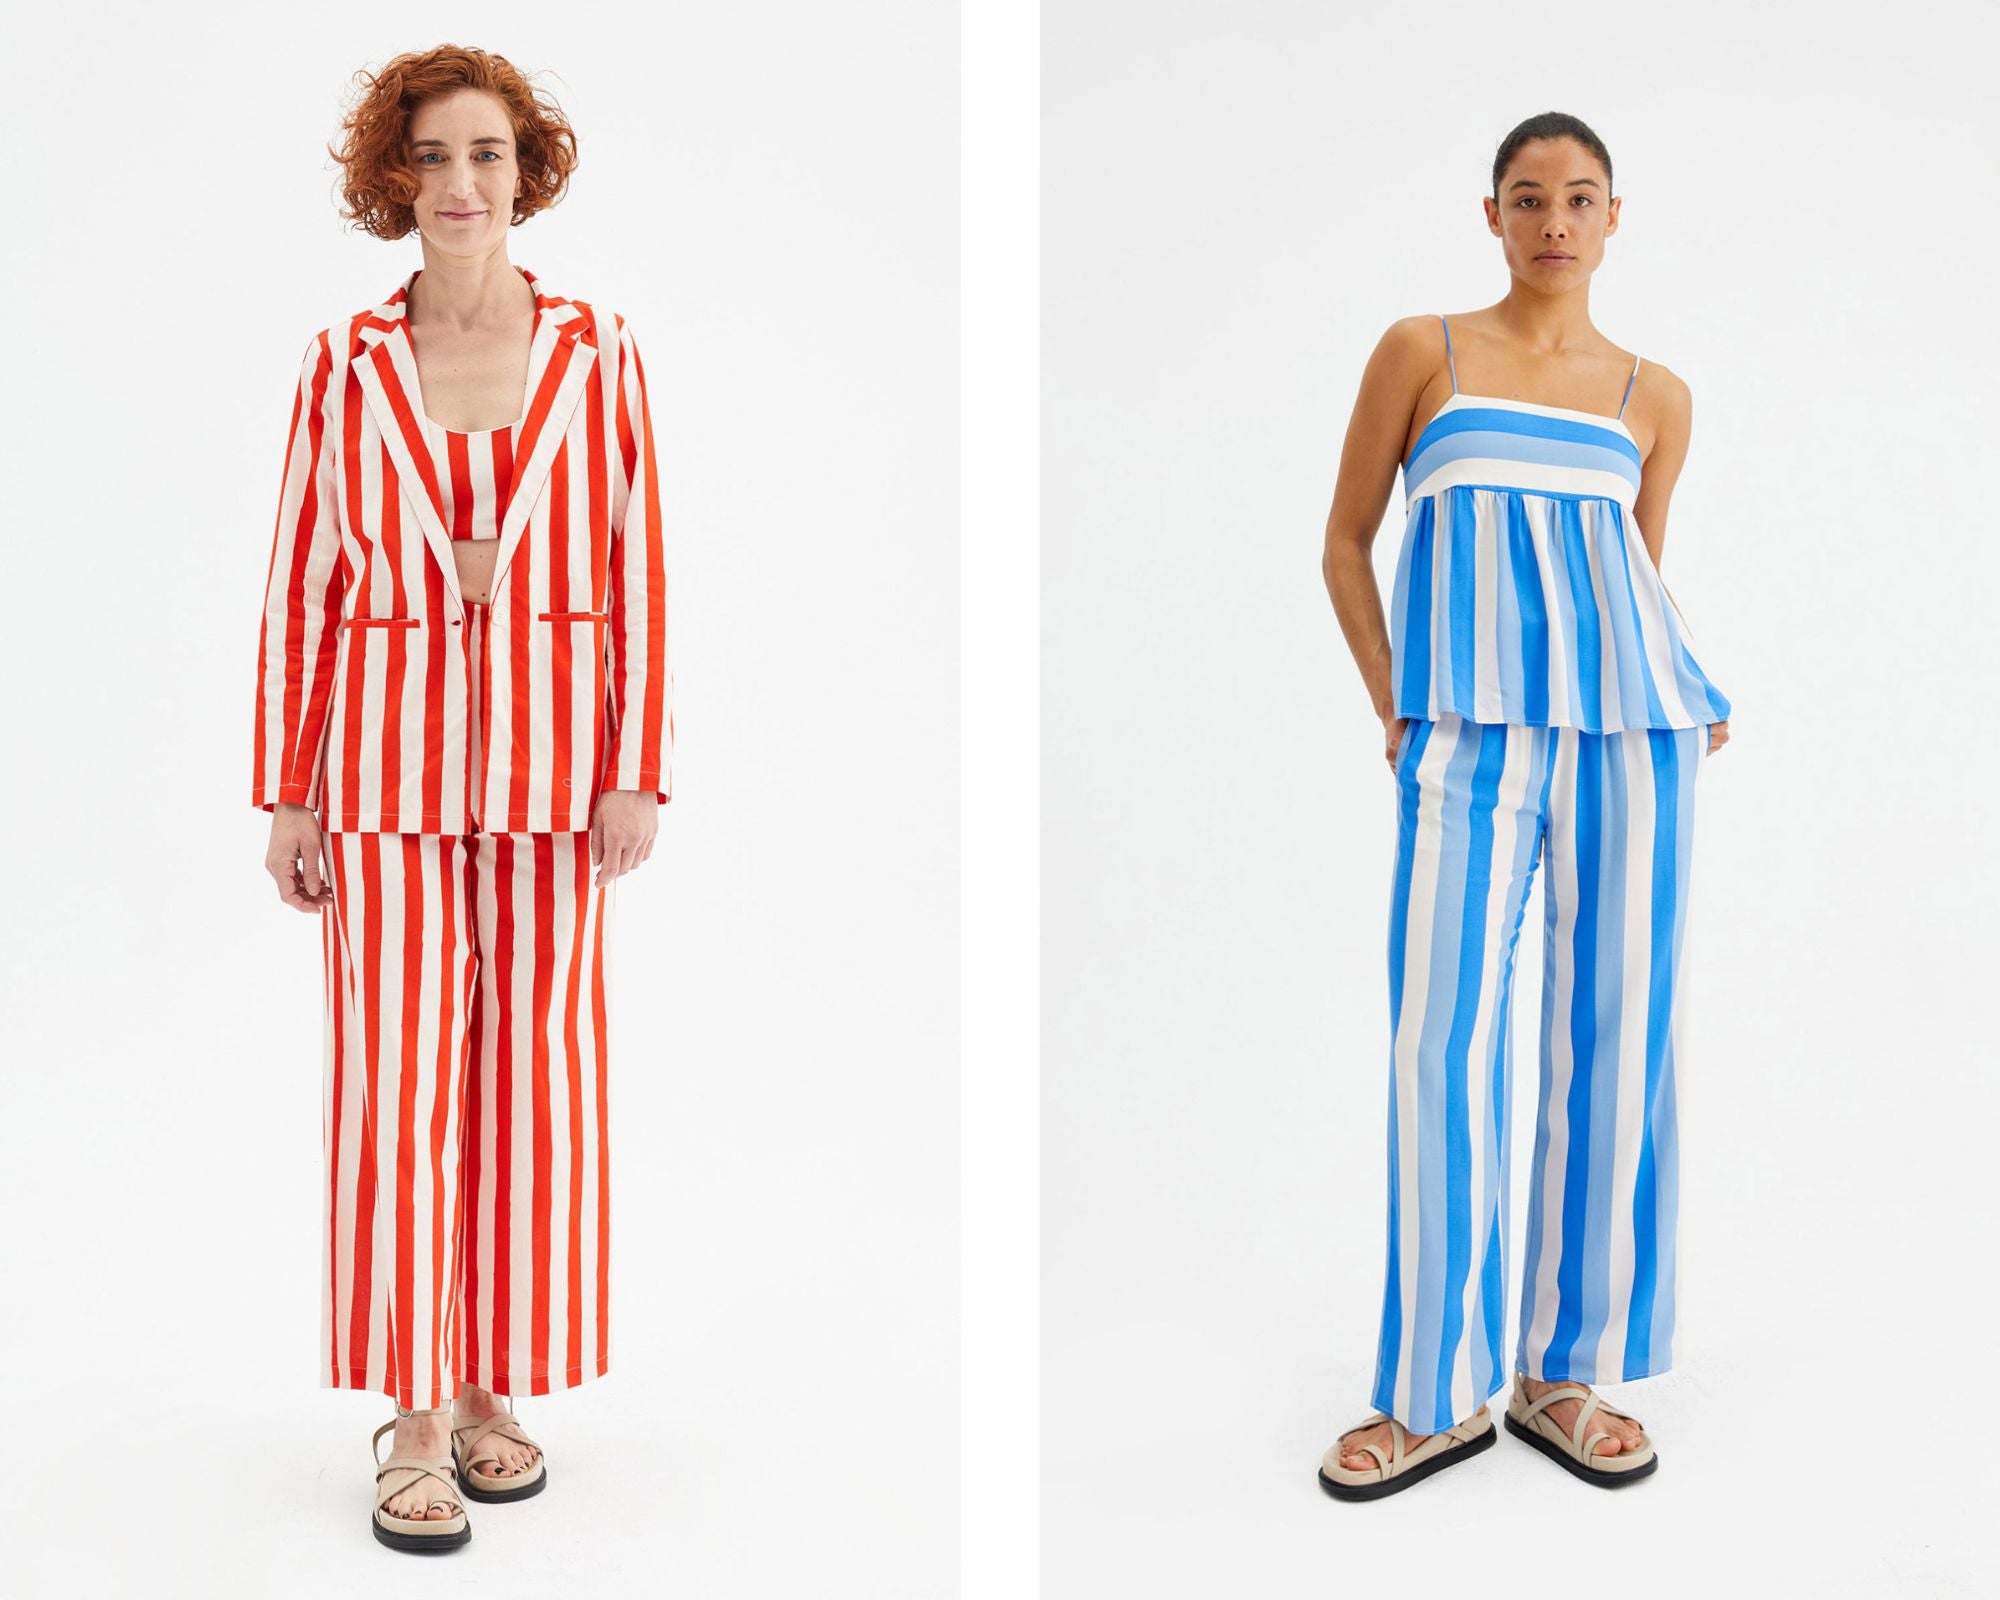 Models with looks from Compañía Fantástica's summer collection with total striped looks